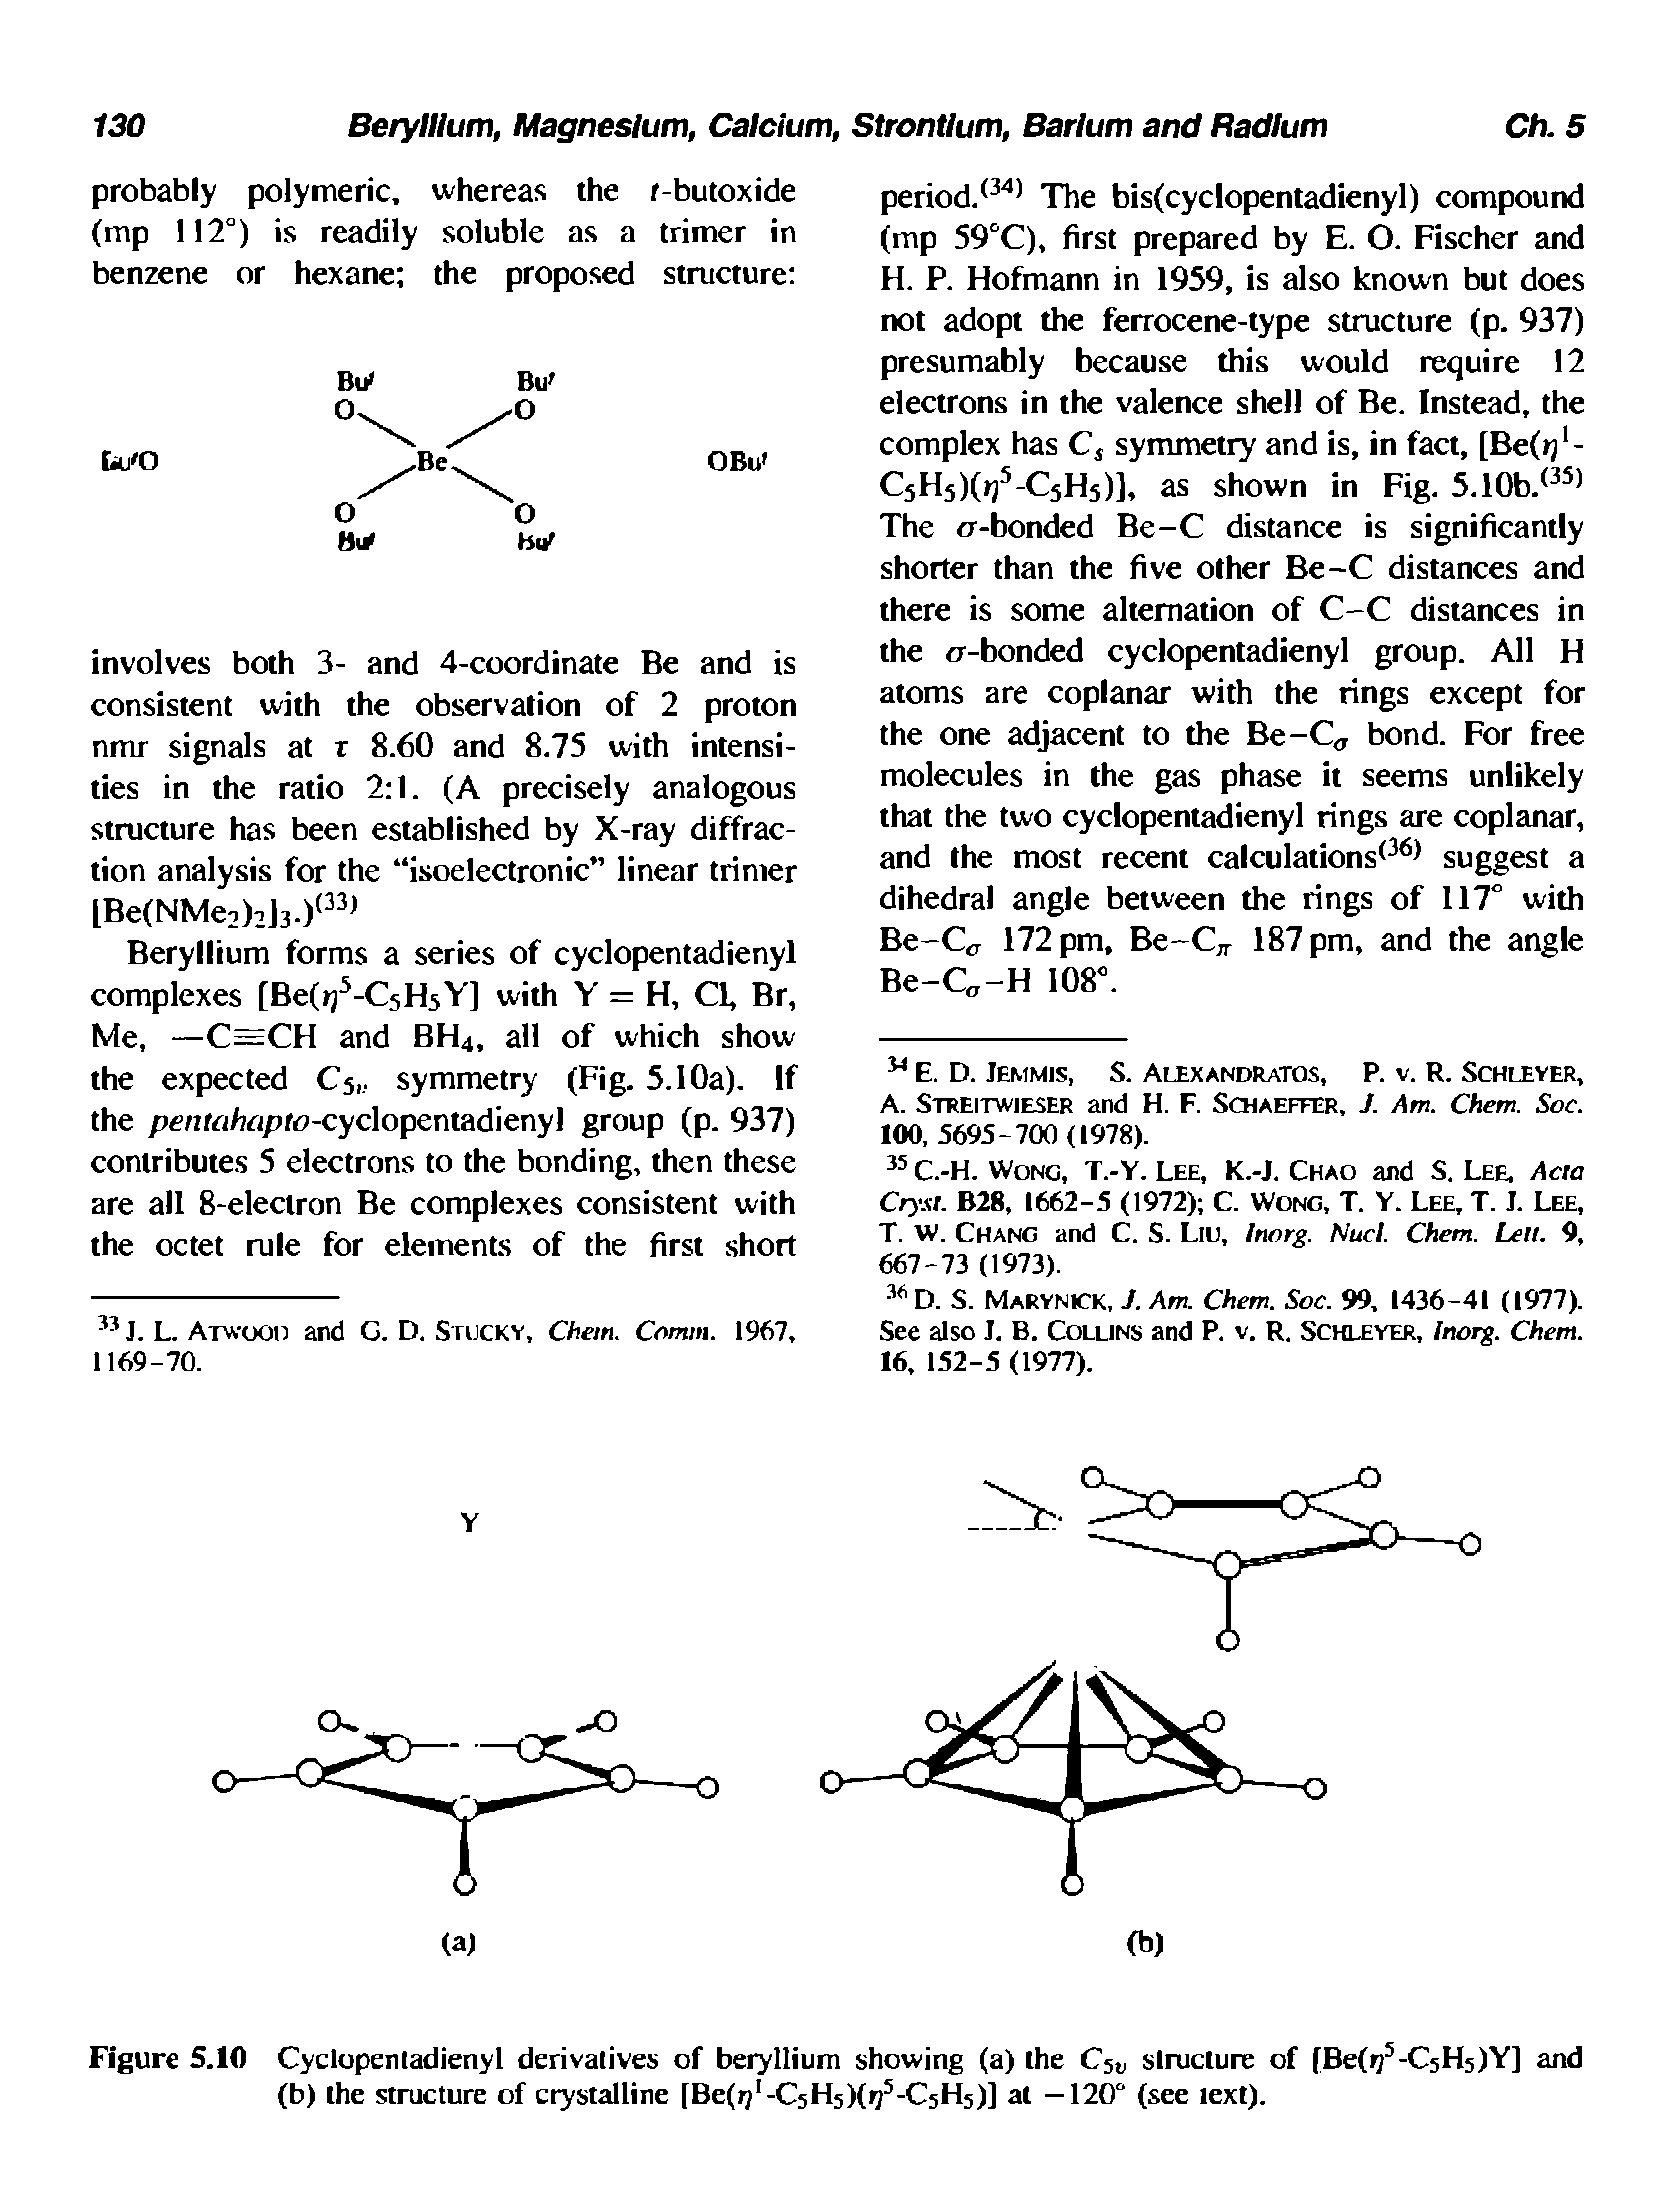 Figure 5.10 Cyclopentadienyl derivatives of beryllium showing (a) the slruclure of fBe(ij -C5H5)Y] and (b) (he structure of crystalline IBe(/j -C5H5)(ij -C5H5)] at —120 (see text).